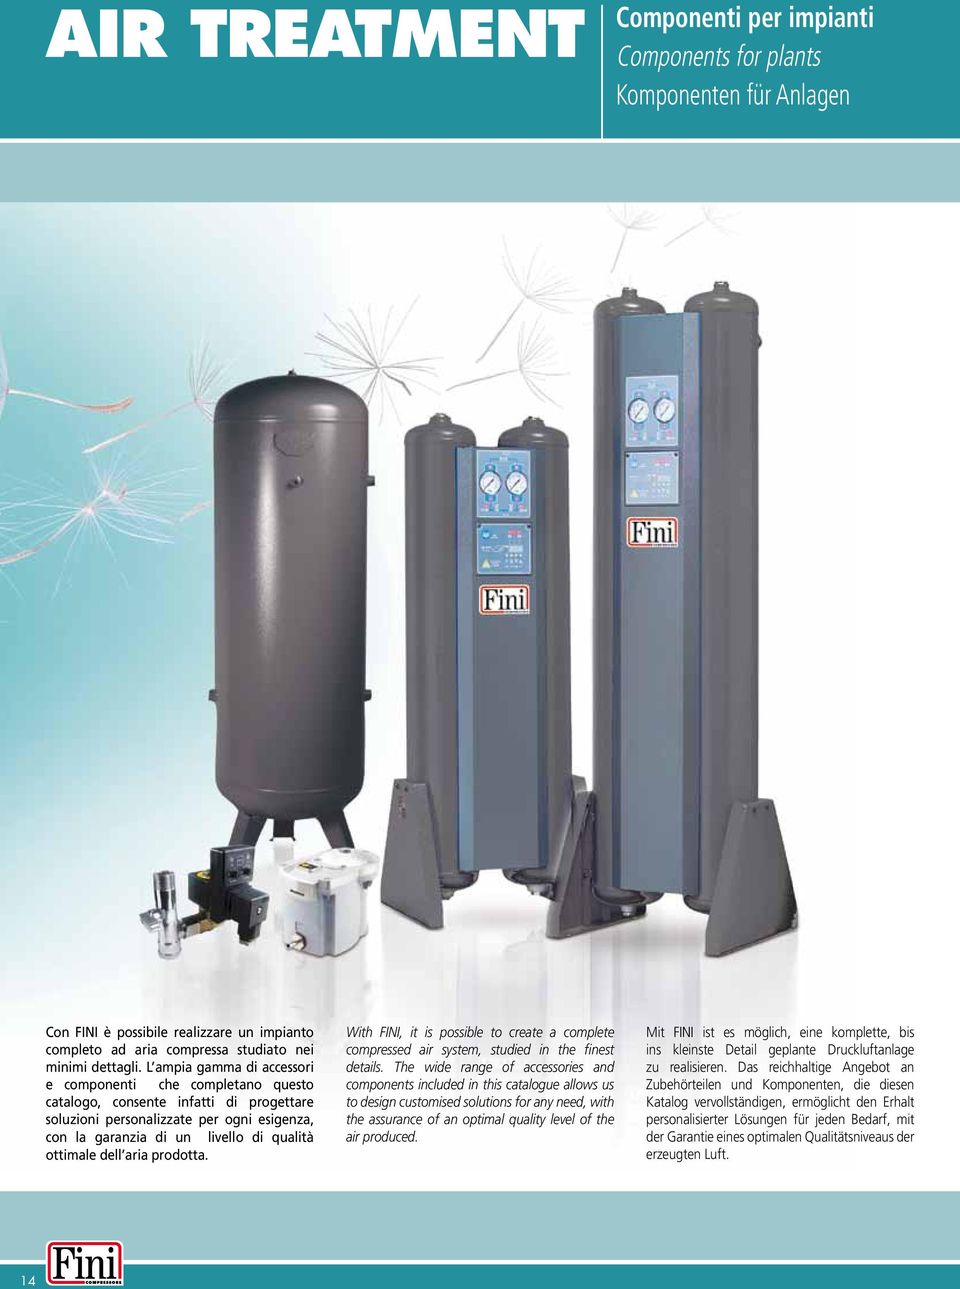 aria prodotta. With FINI, it is possible to create a complete compressed air system, studied in the finest details.